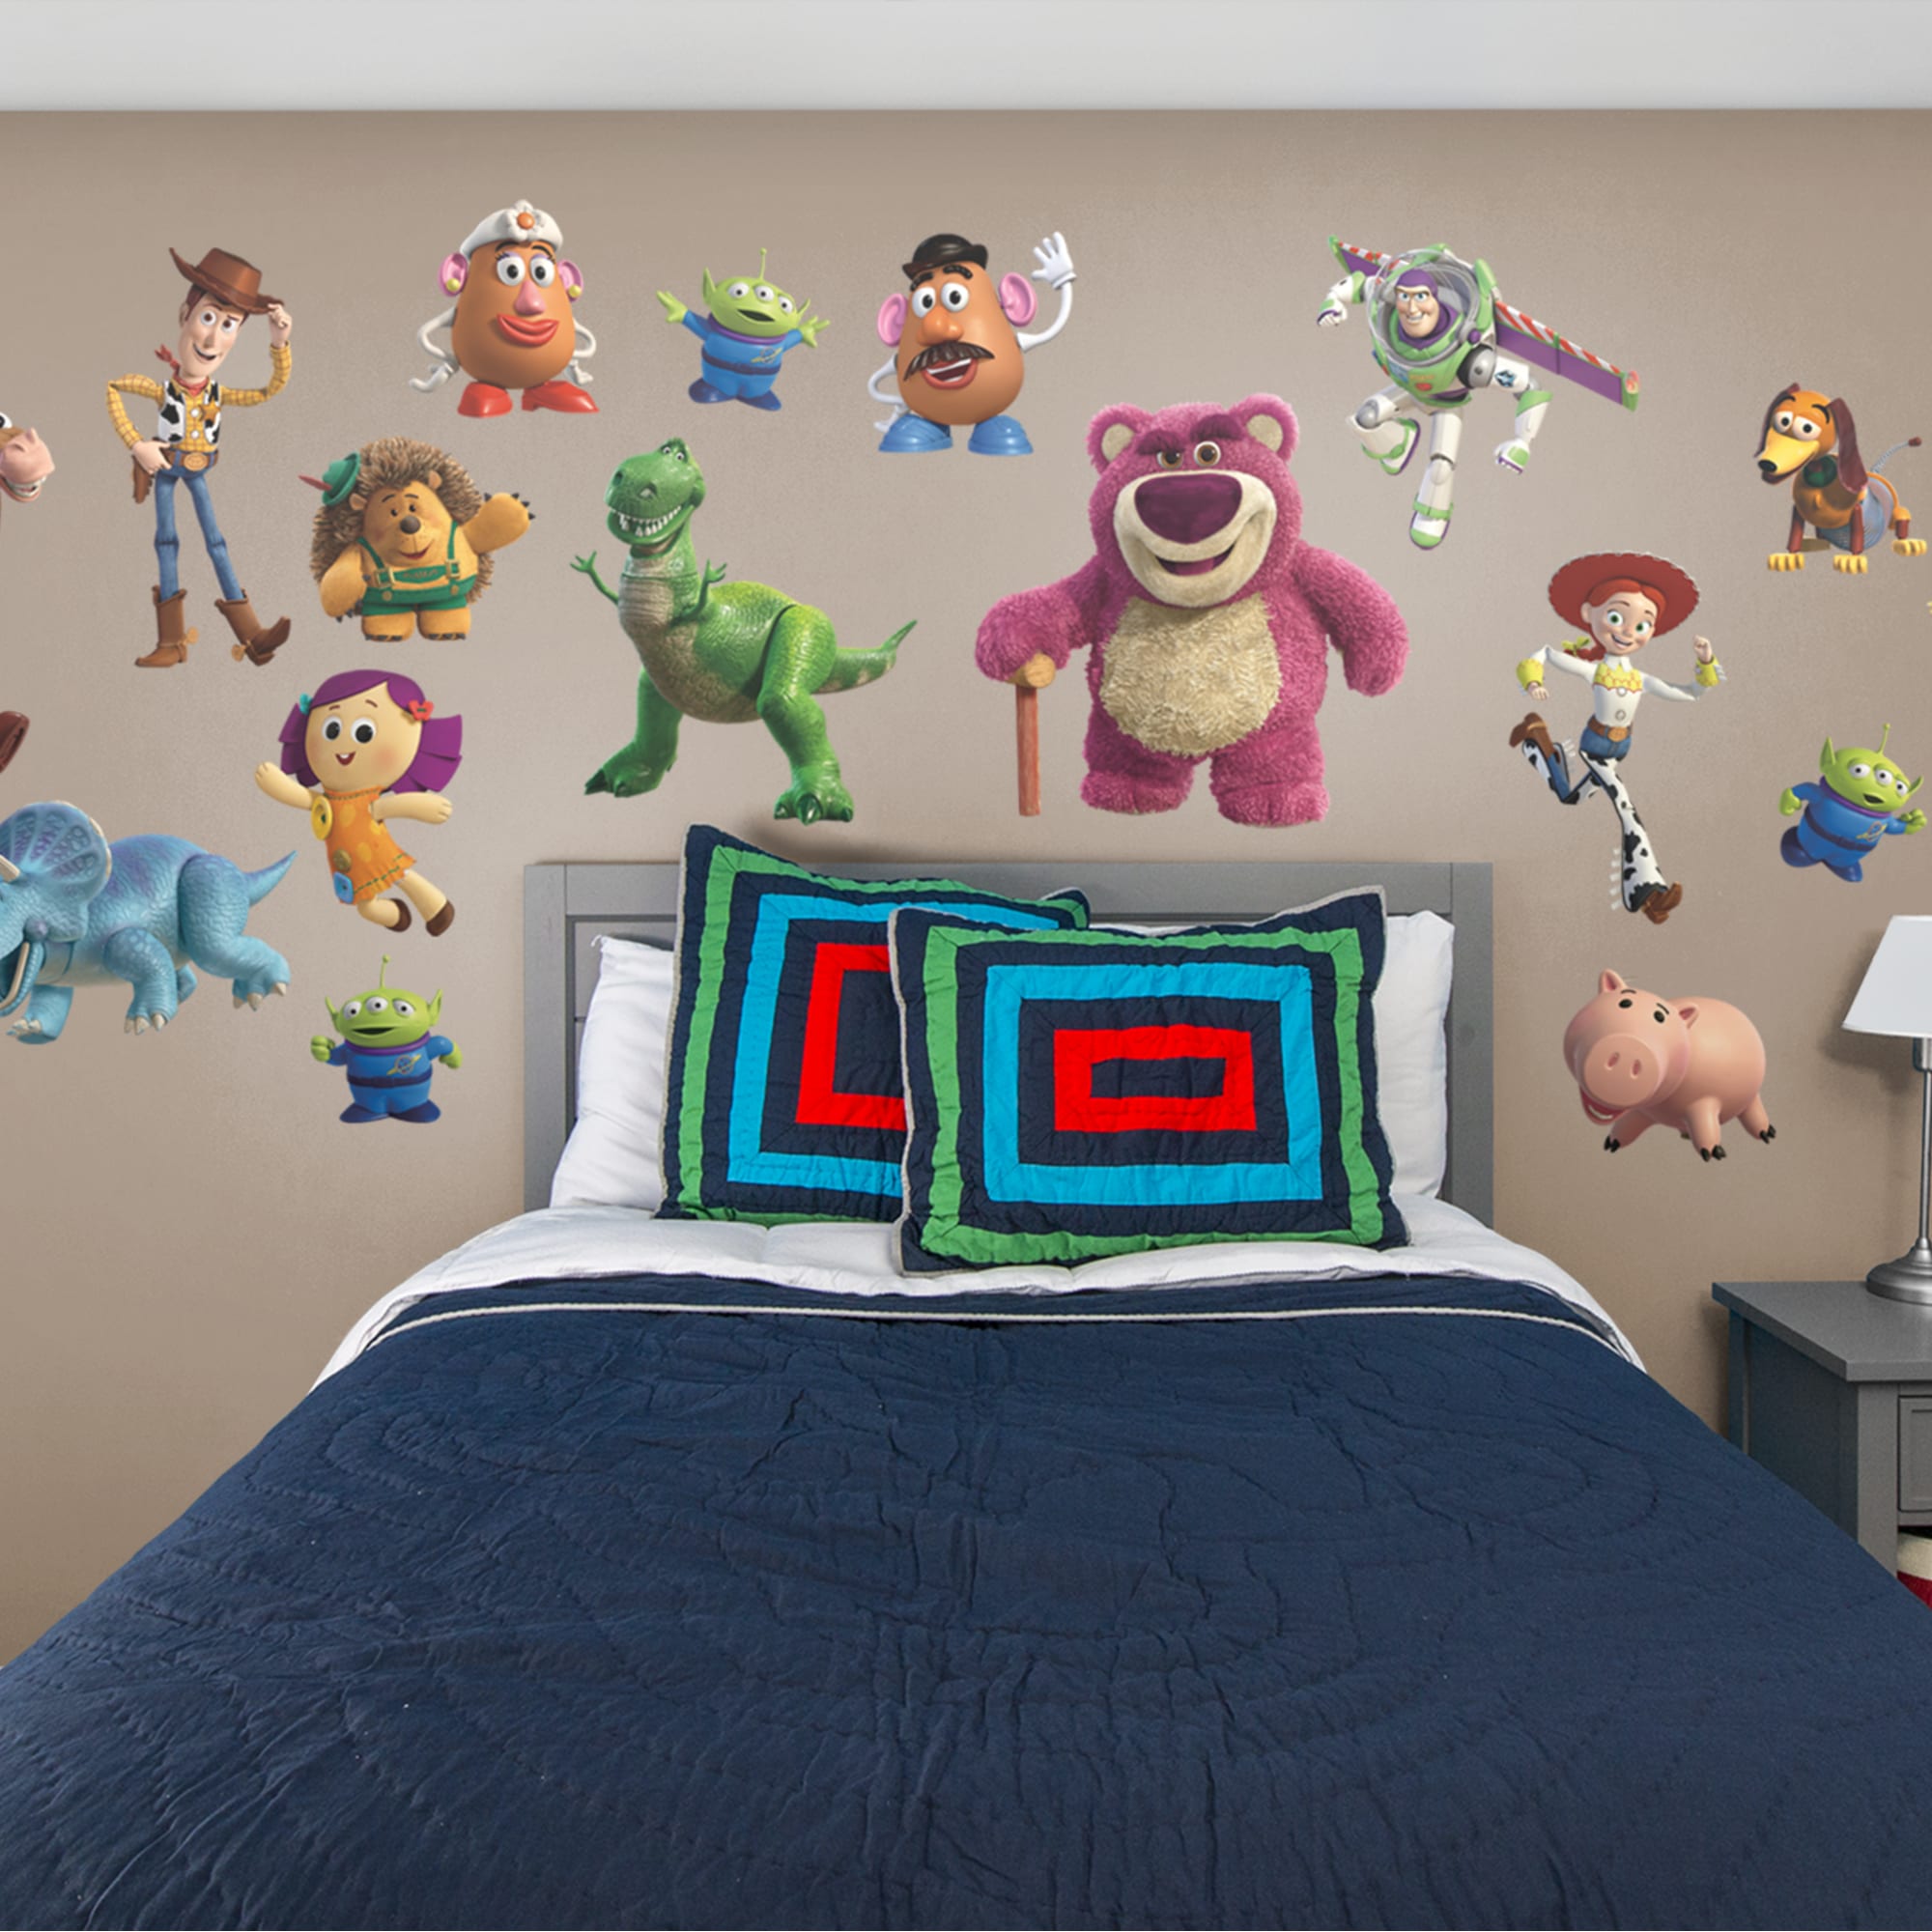 Toy Story 3: Collection - Officially Licensed Disney/PIXAR Removable Wall Decals 79.0"W x 52.0"H by Fathead | Vinyl